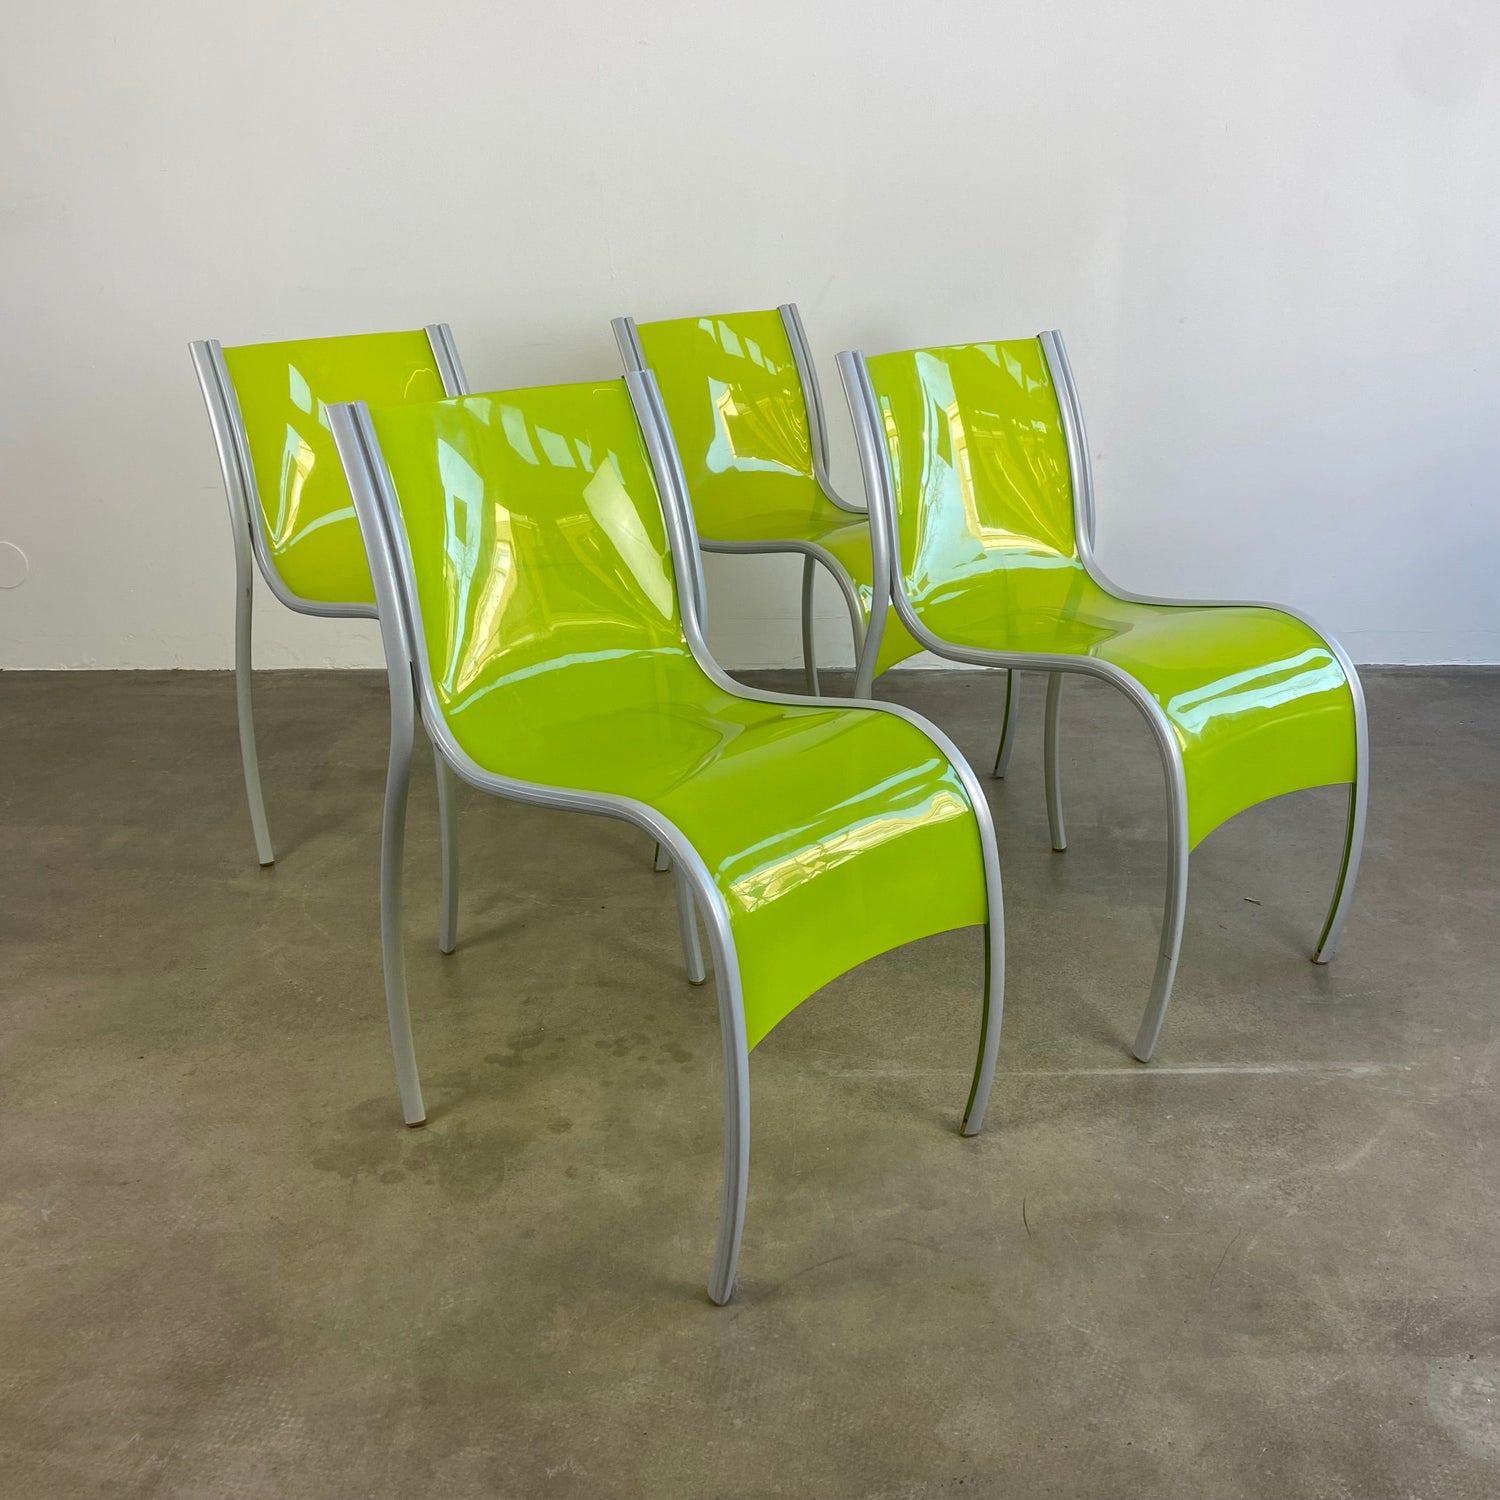 fpe-chairs-ron-arad-kartell